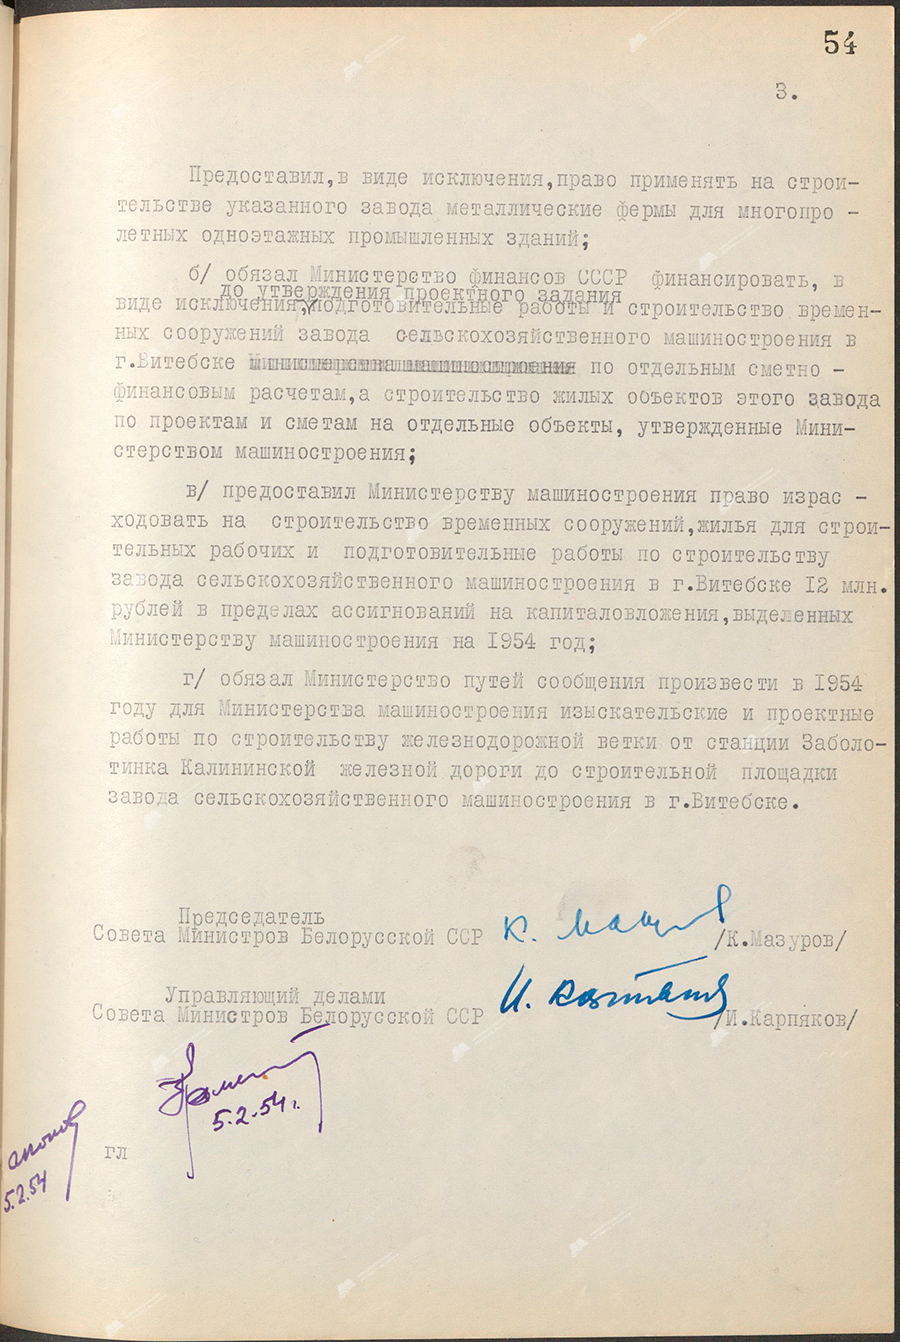 Resolution No. 93 of the Council of Ministers of the Byelorussian SSR «On the construction of an agricultural machinery plant of the Ministry of Mechanical Engineering in Vitebsk»-стр. 1